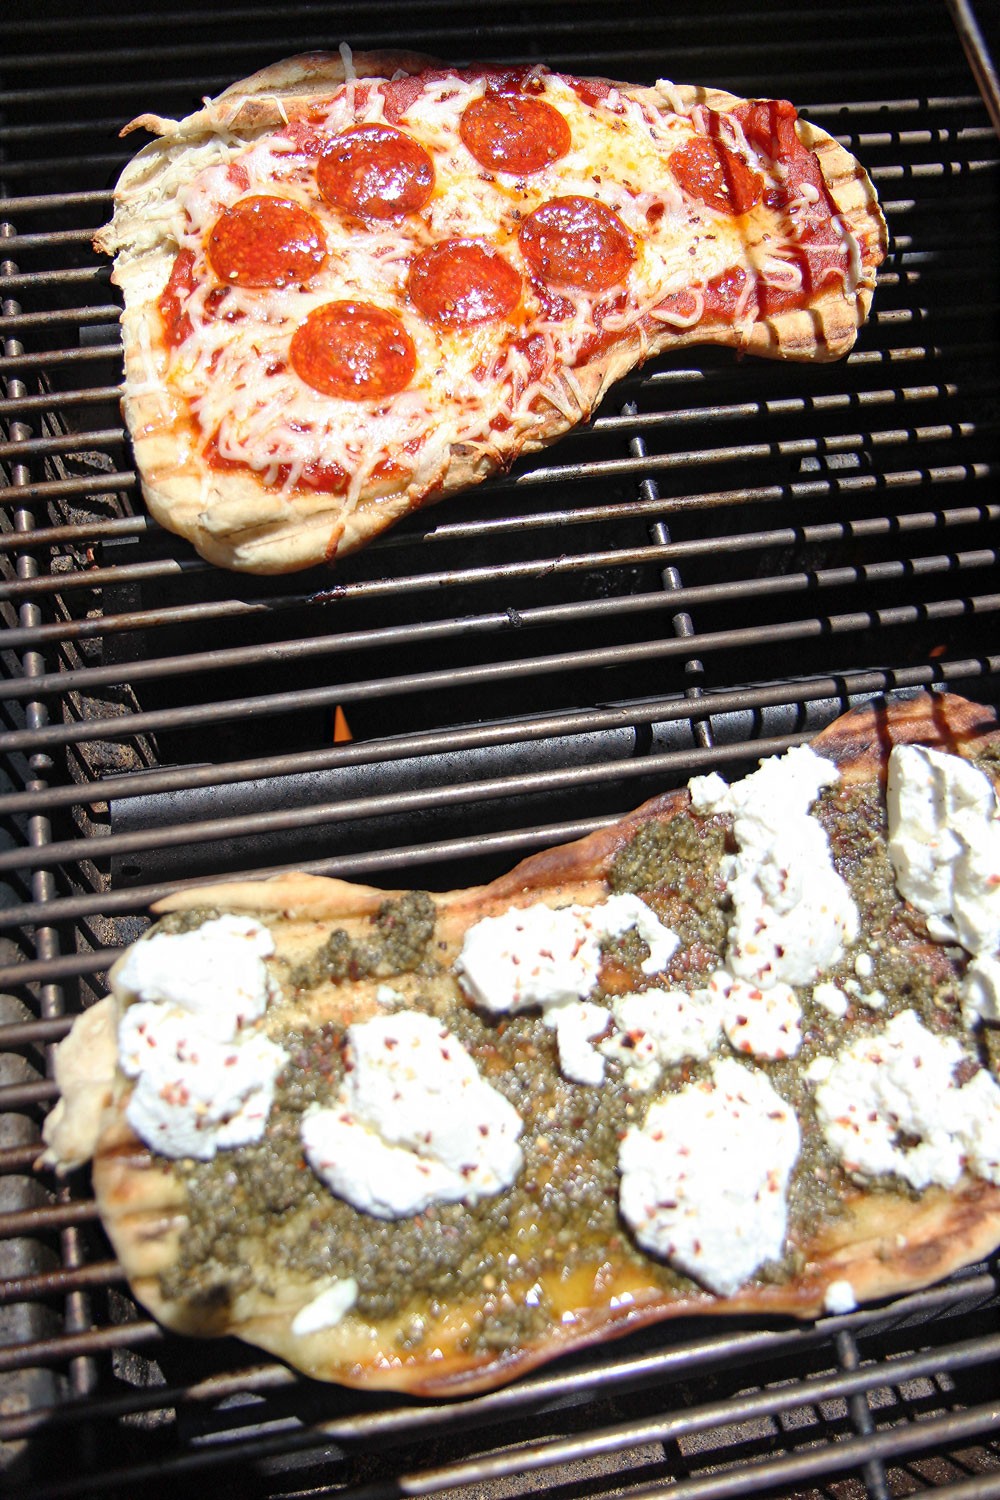 How To Grill Pizza (faster then take out) Recipe. This can be done on a grill pan or BBQ. Grab pizza dough, oil, tomato sauce, cheese, and pizza happiness. www.ChopHappy.com #grilledpizza #pizzarecipe